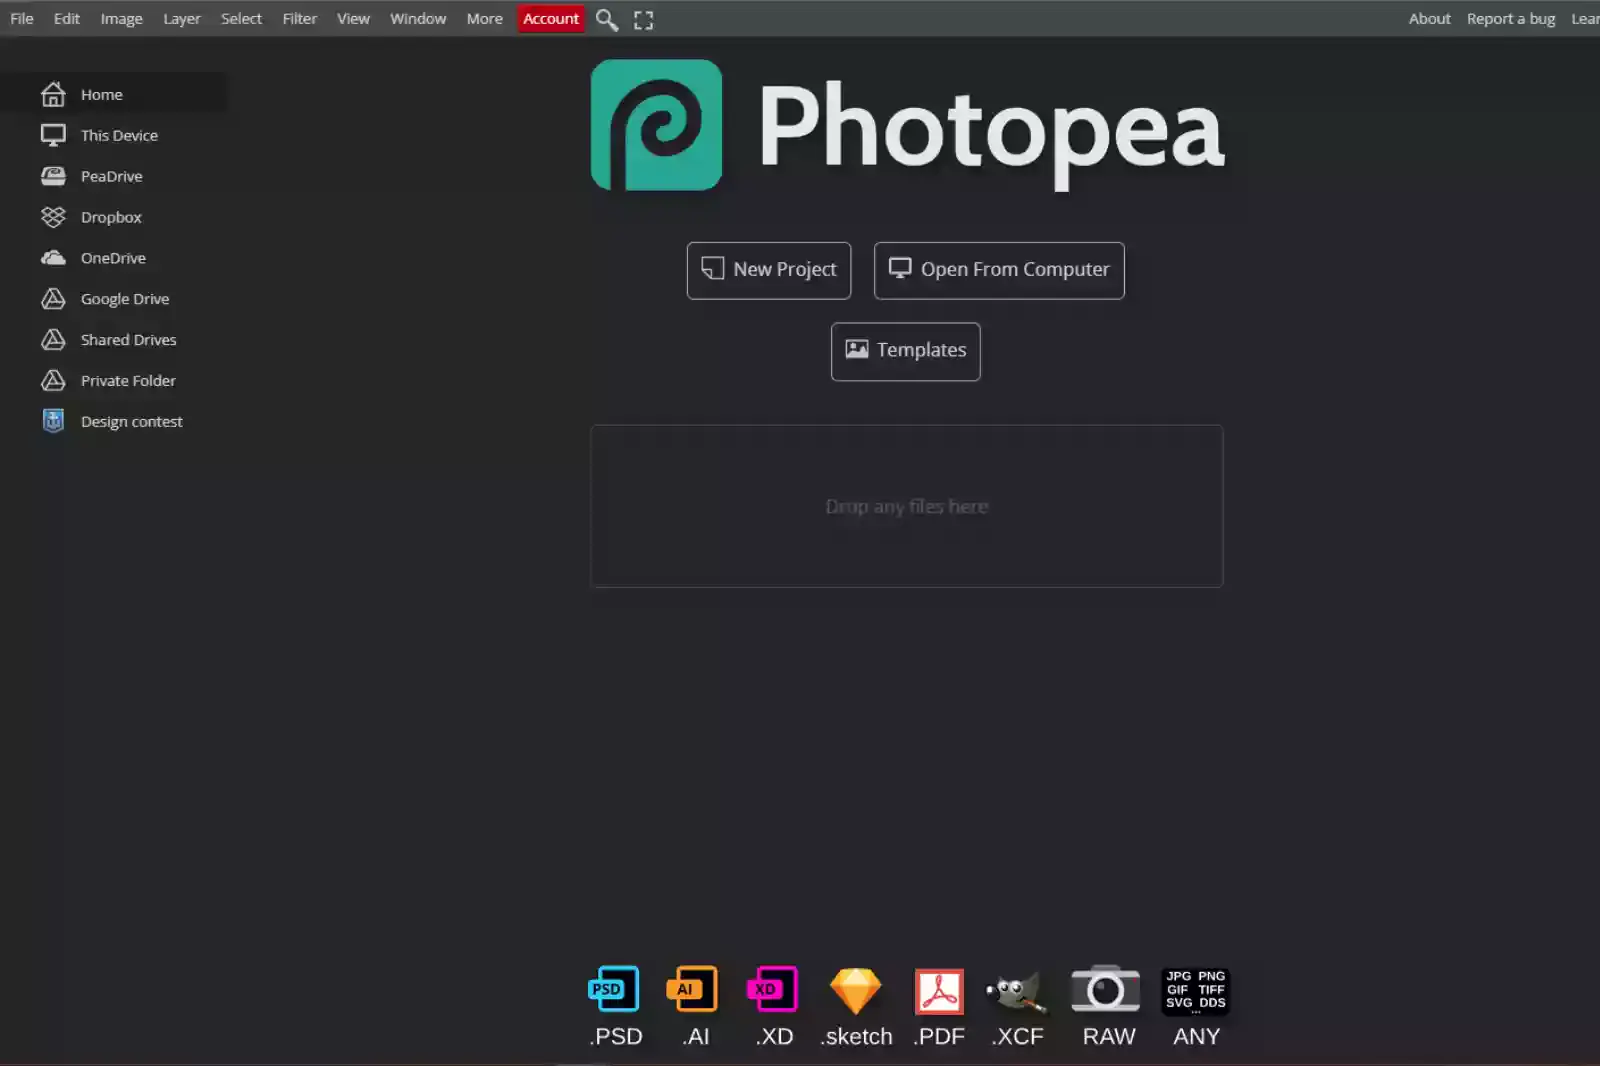 Home Page of Photopea